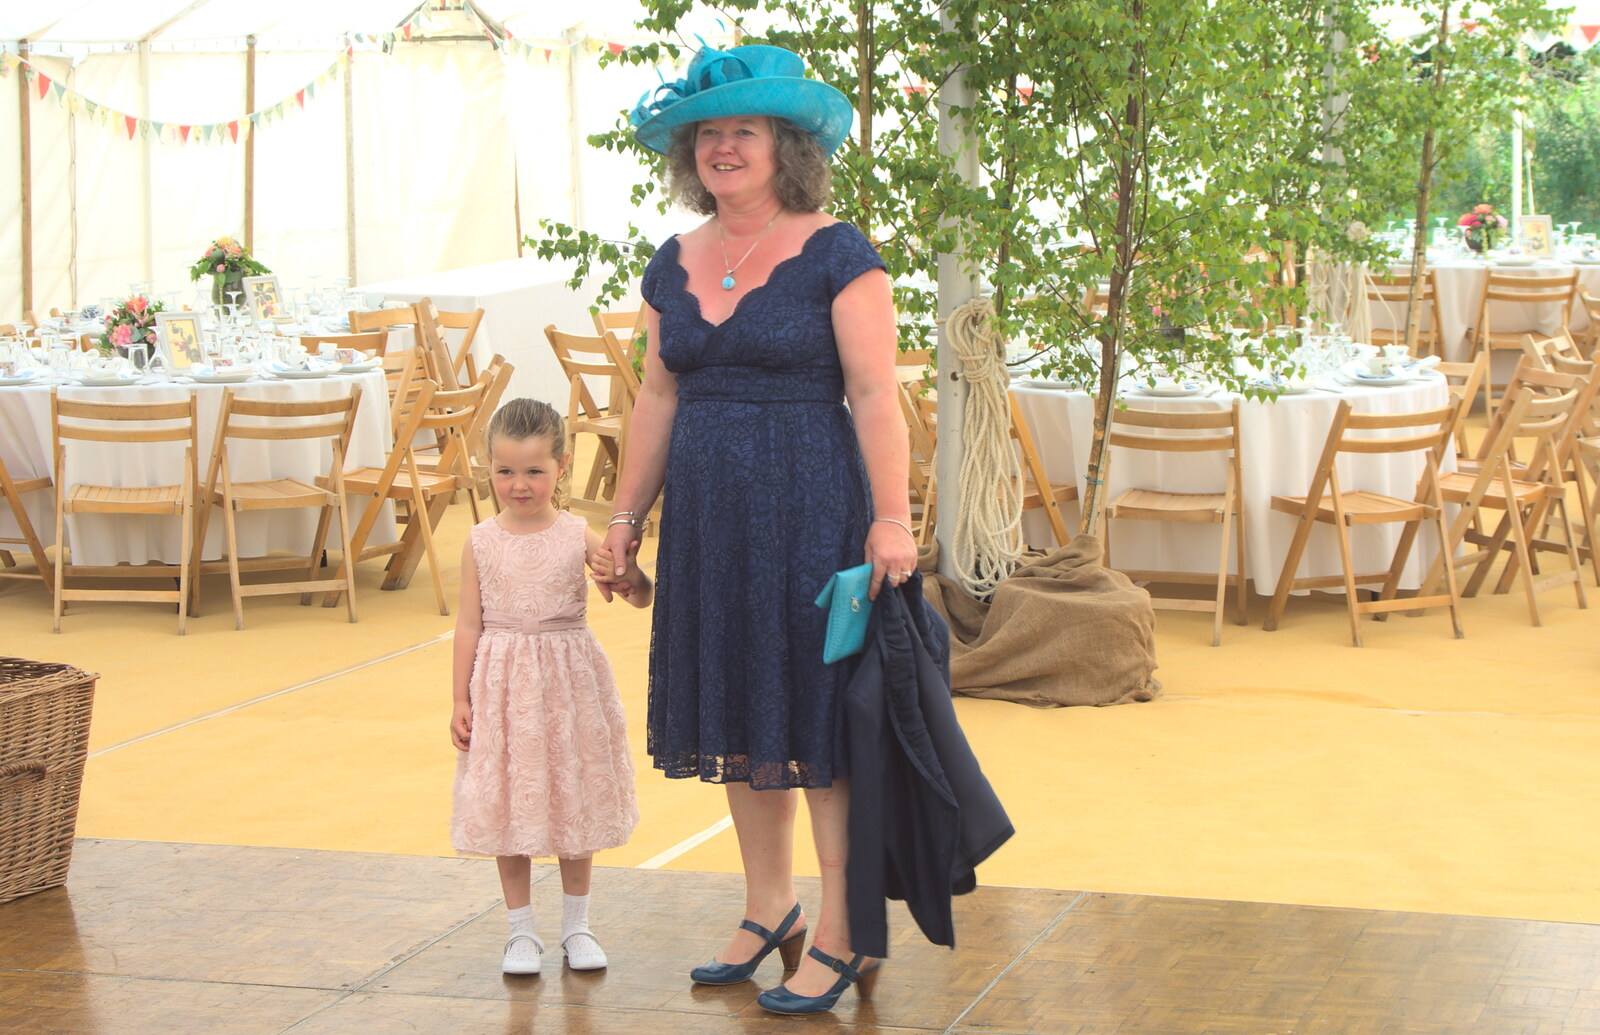 Jo and her god-daughter from The BBs Play Steph's Wedding, Burston, Norfolk - 13th July 2013